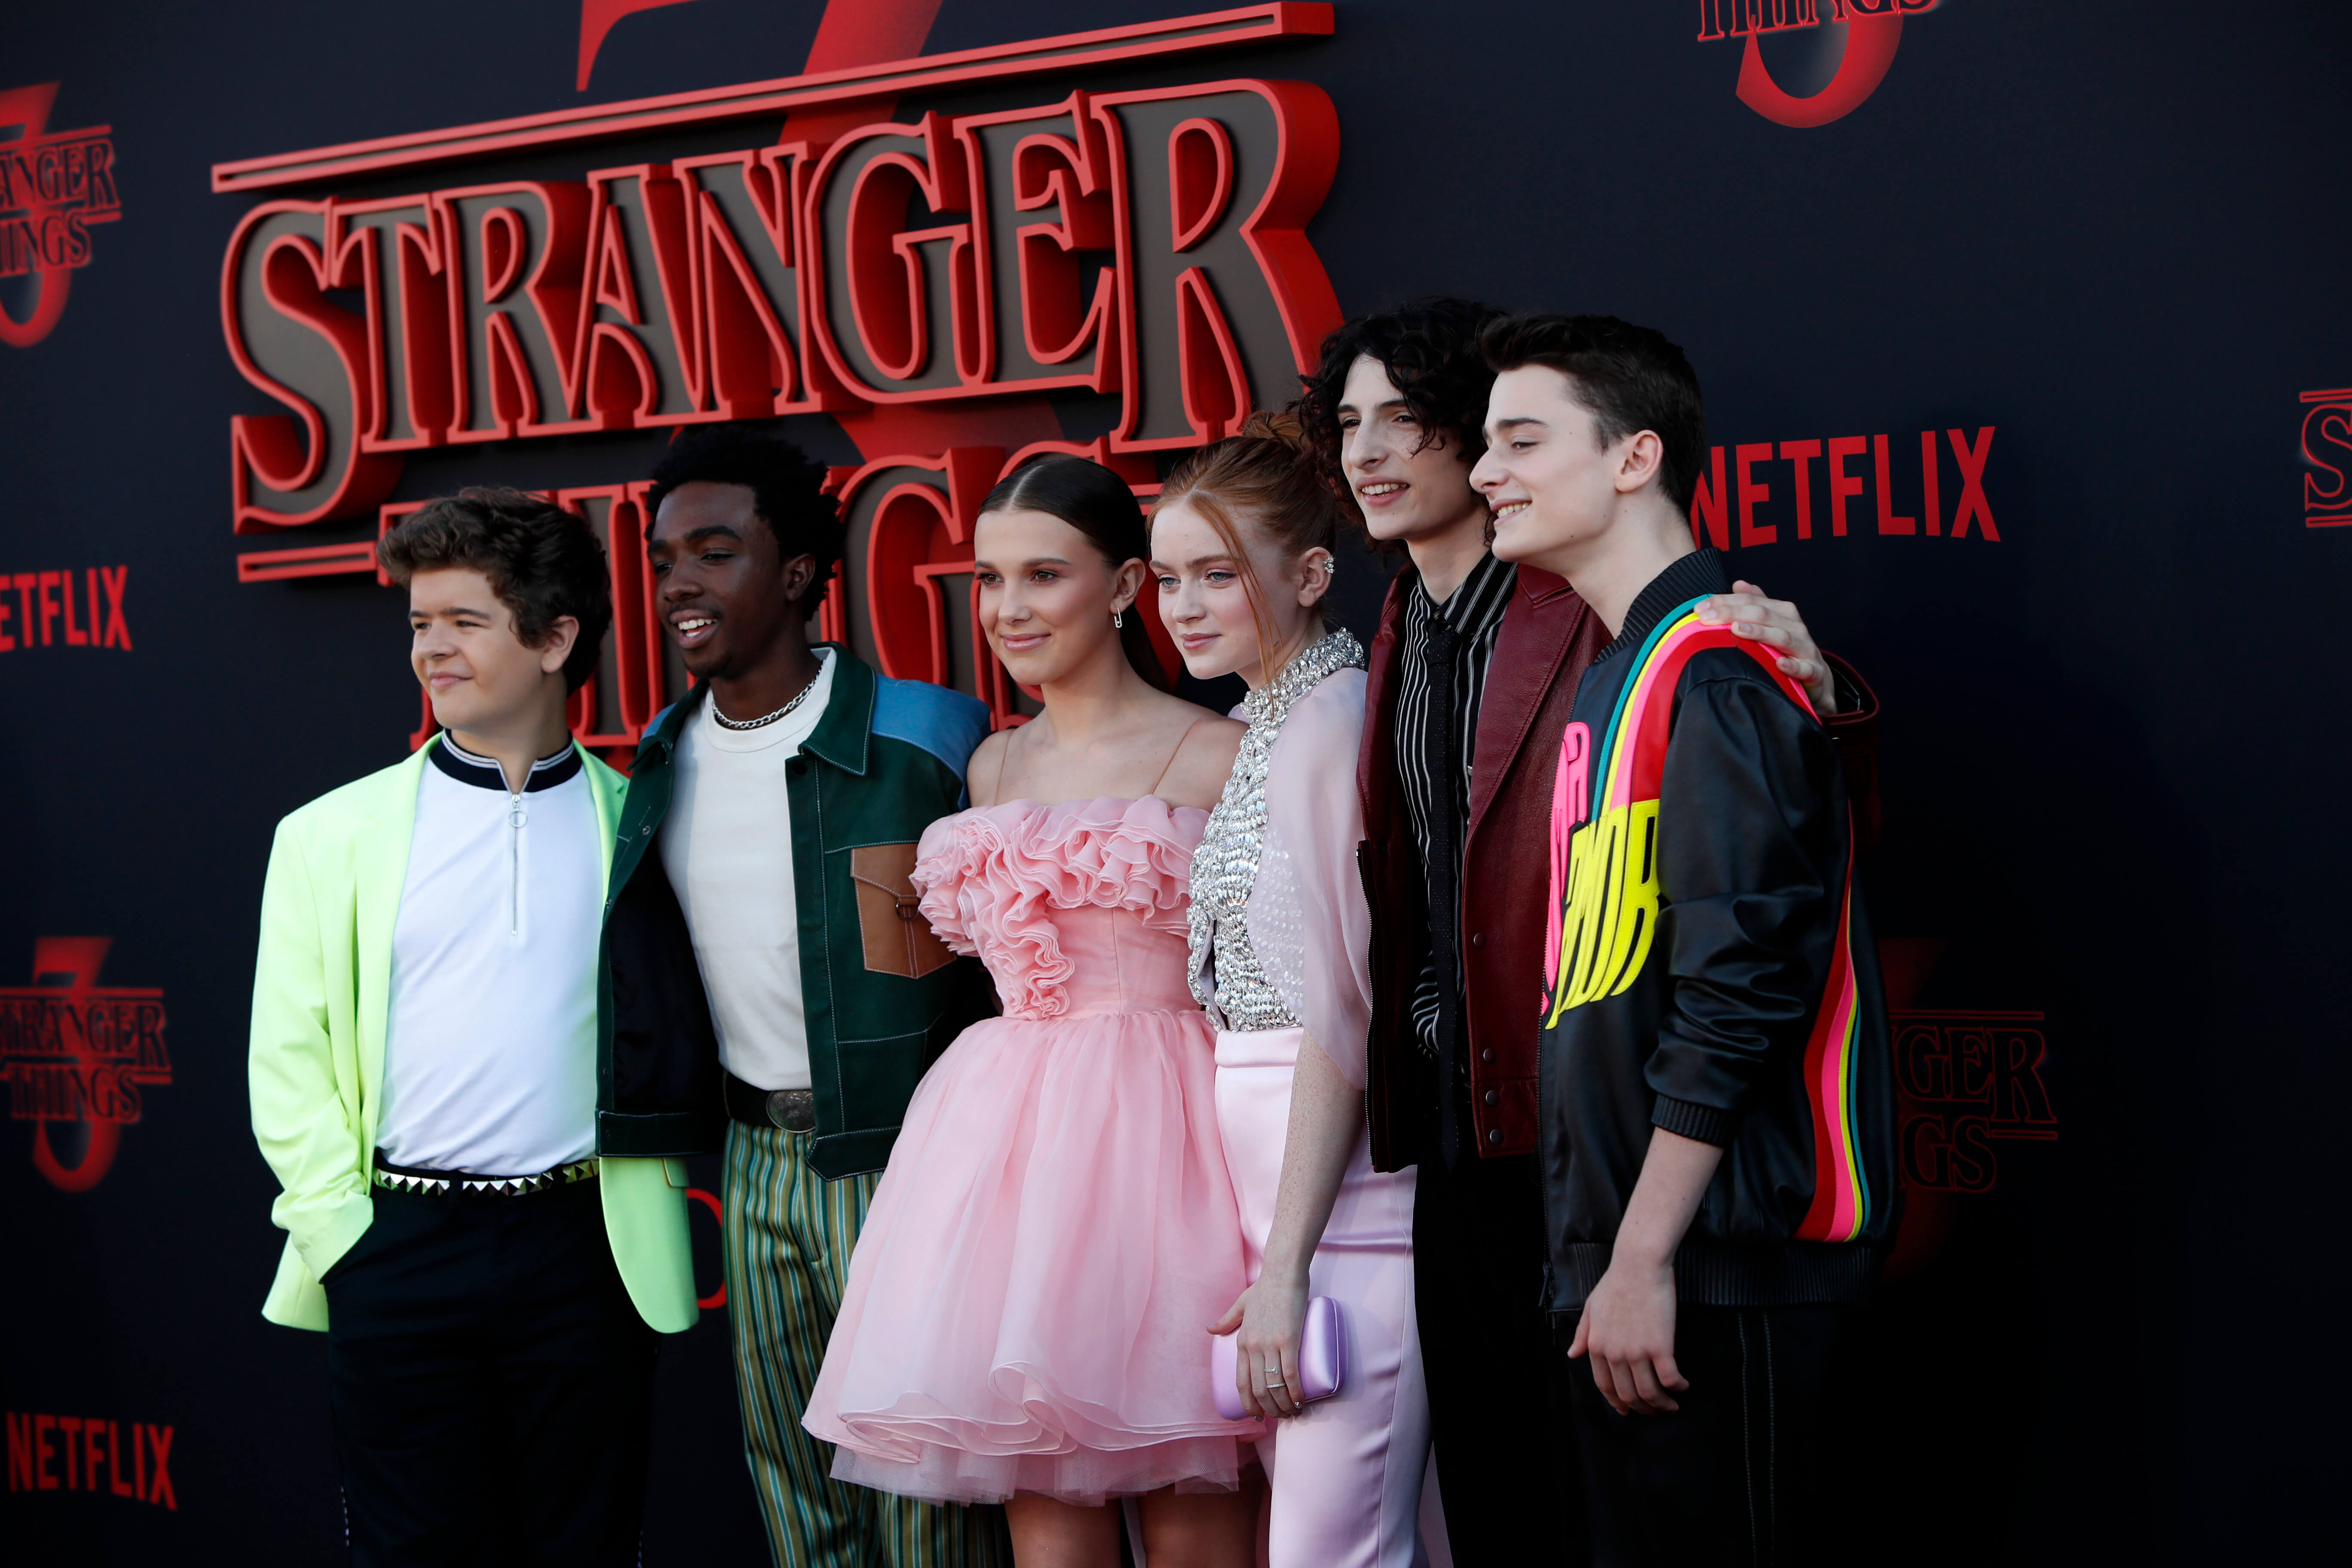 Netflix's Stranger Things is one of the most popular TV shows of all time. Source: Shutterstock